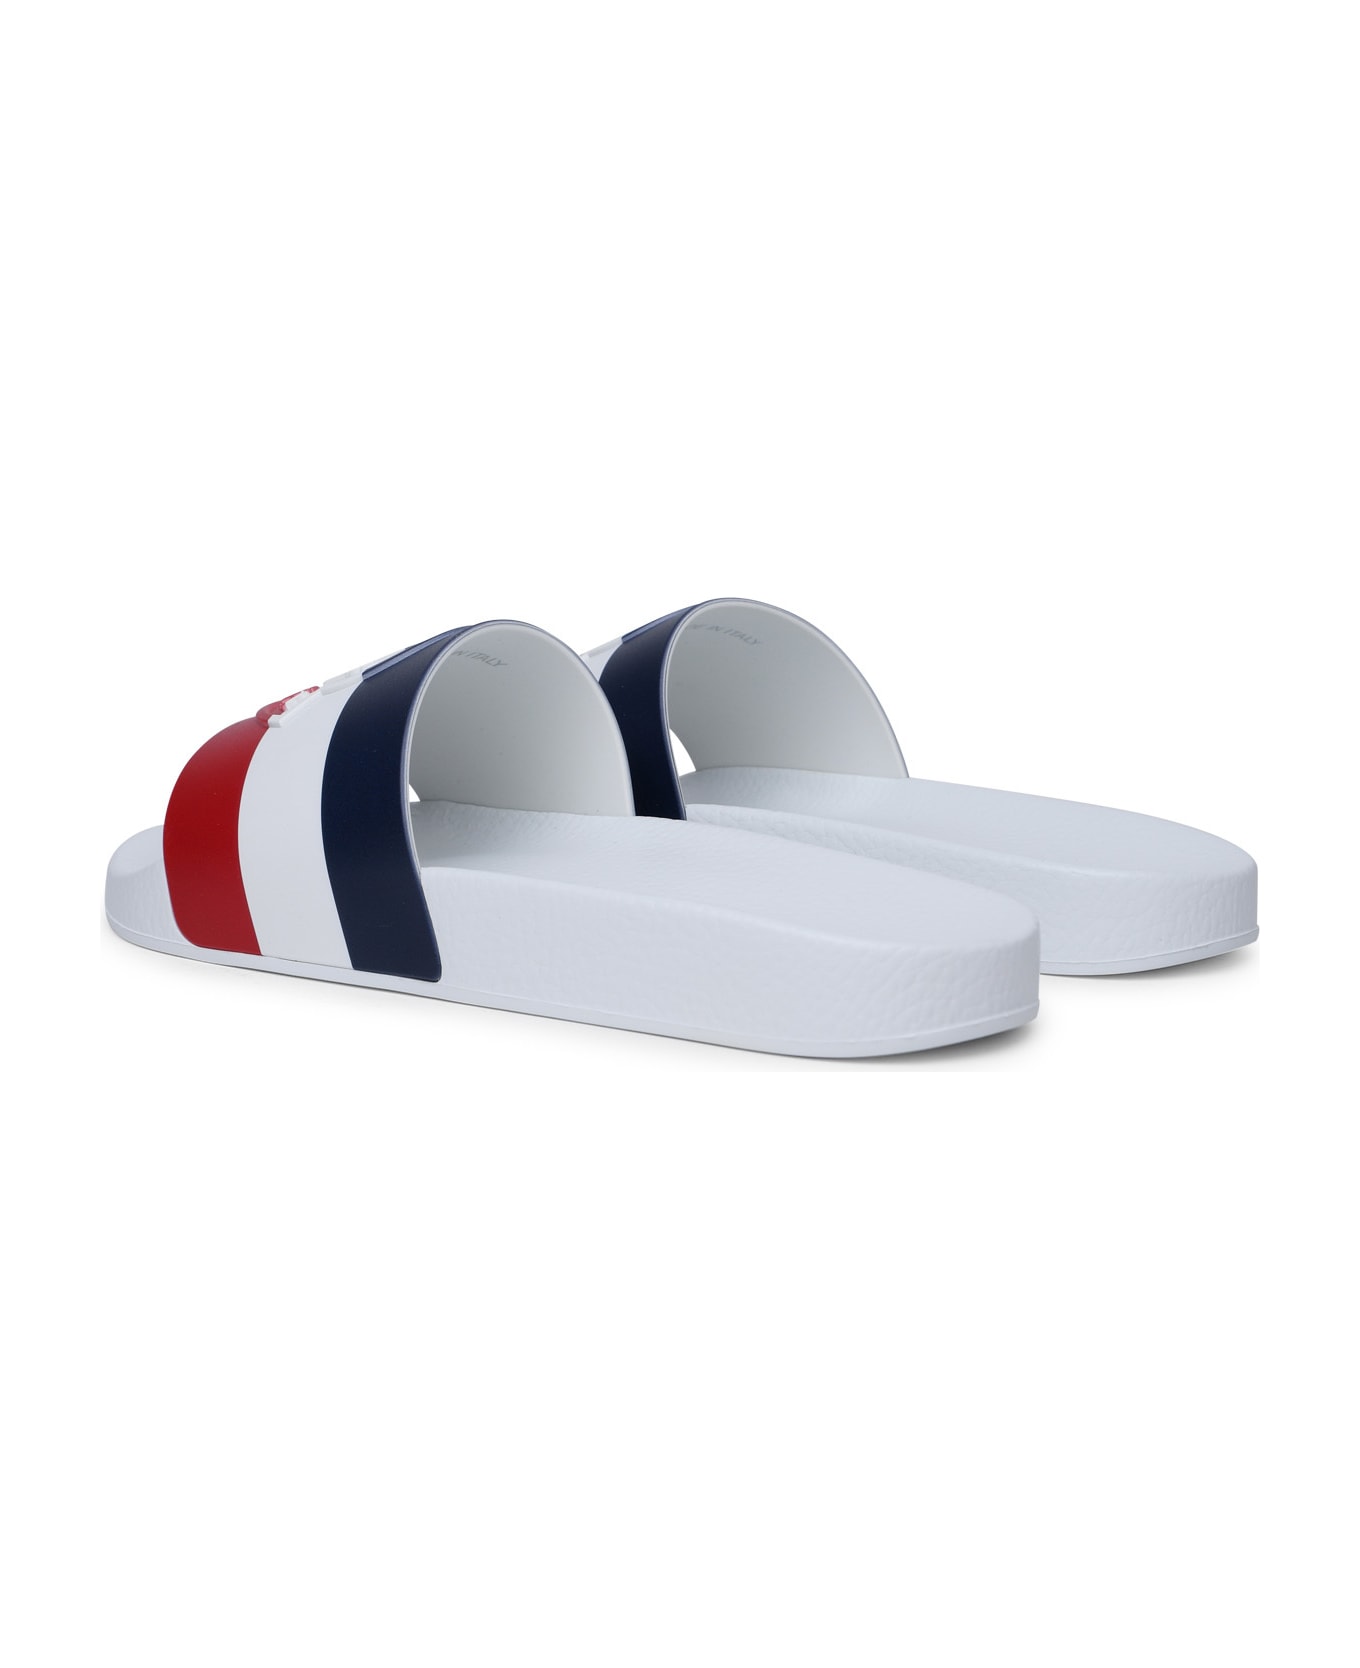 Moncler 'basile' White Rubber Slippers - Bianco